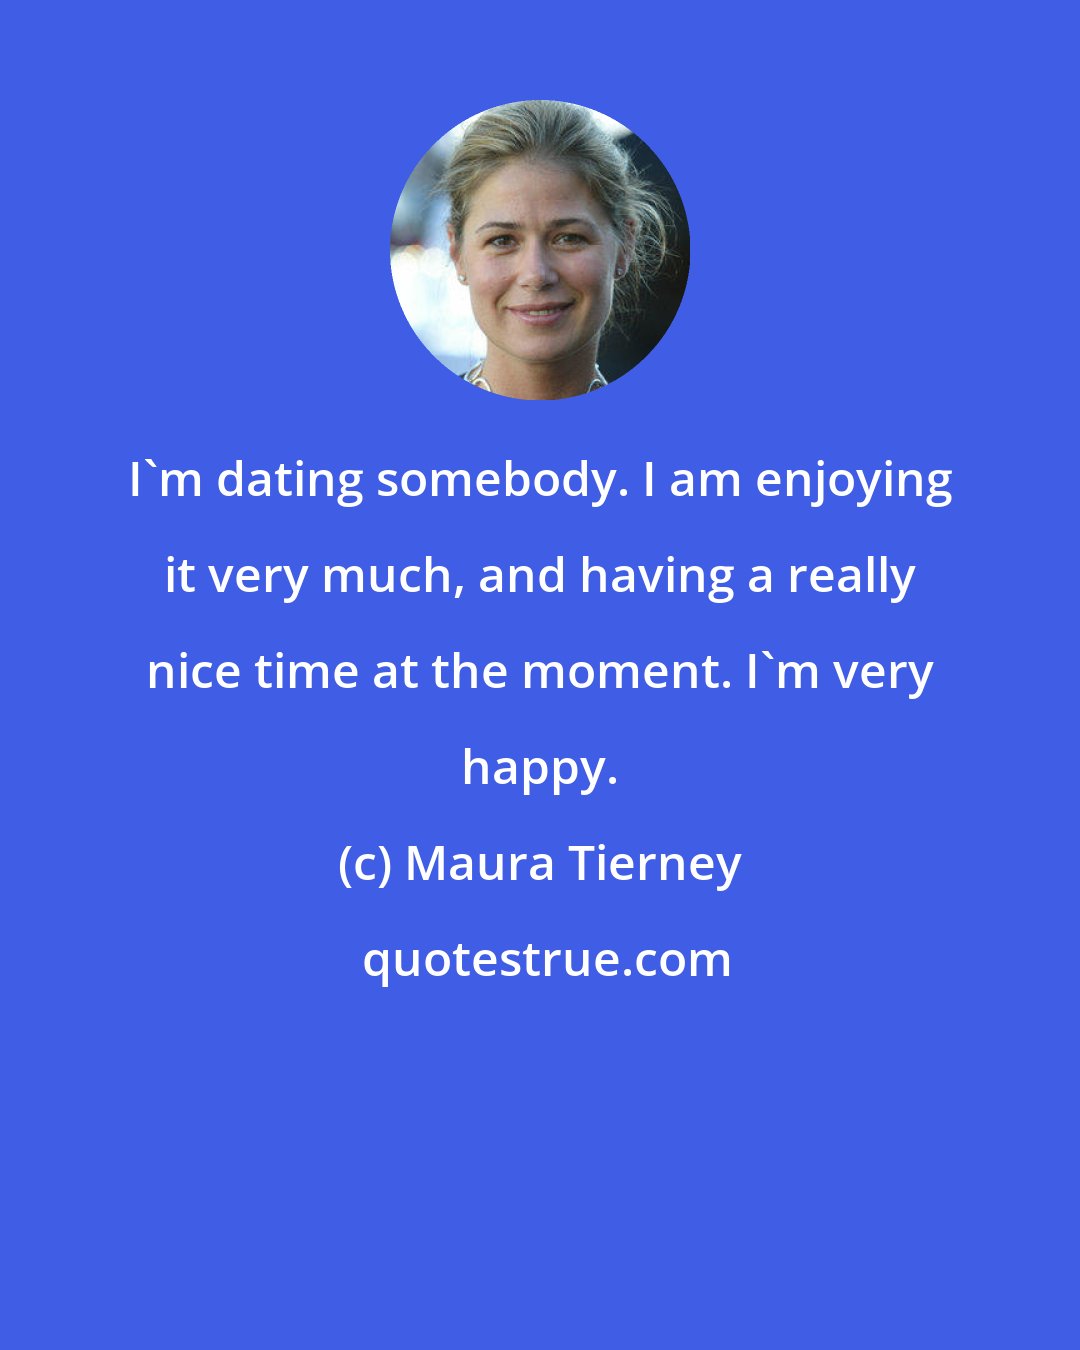 Maura Tierney: I'm dating somebody. I am enjoying it very much, and having a really nice time at the moment. I'm very happy.